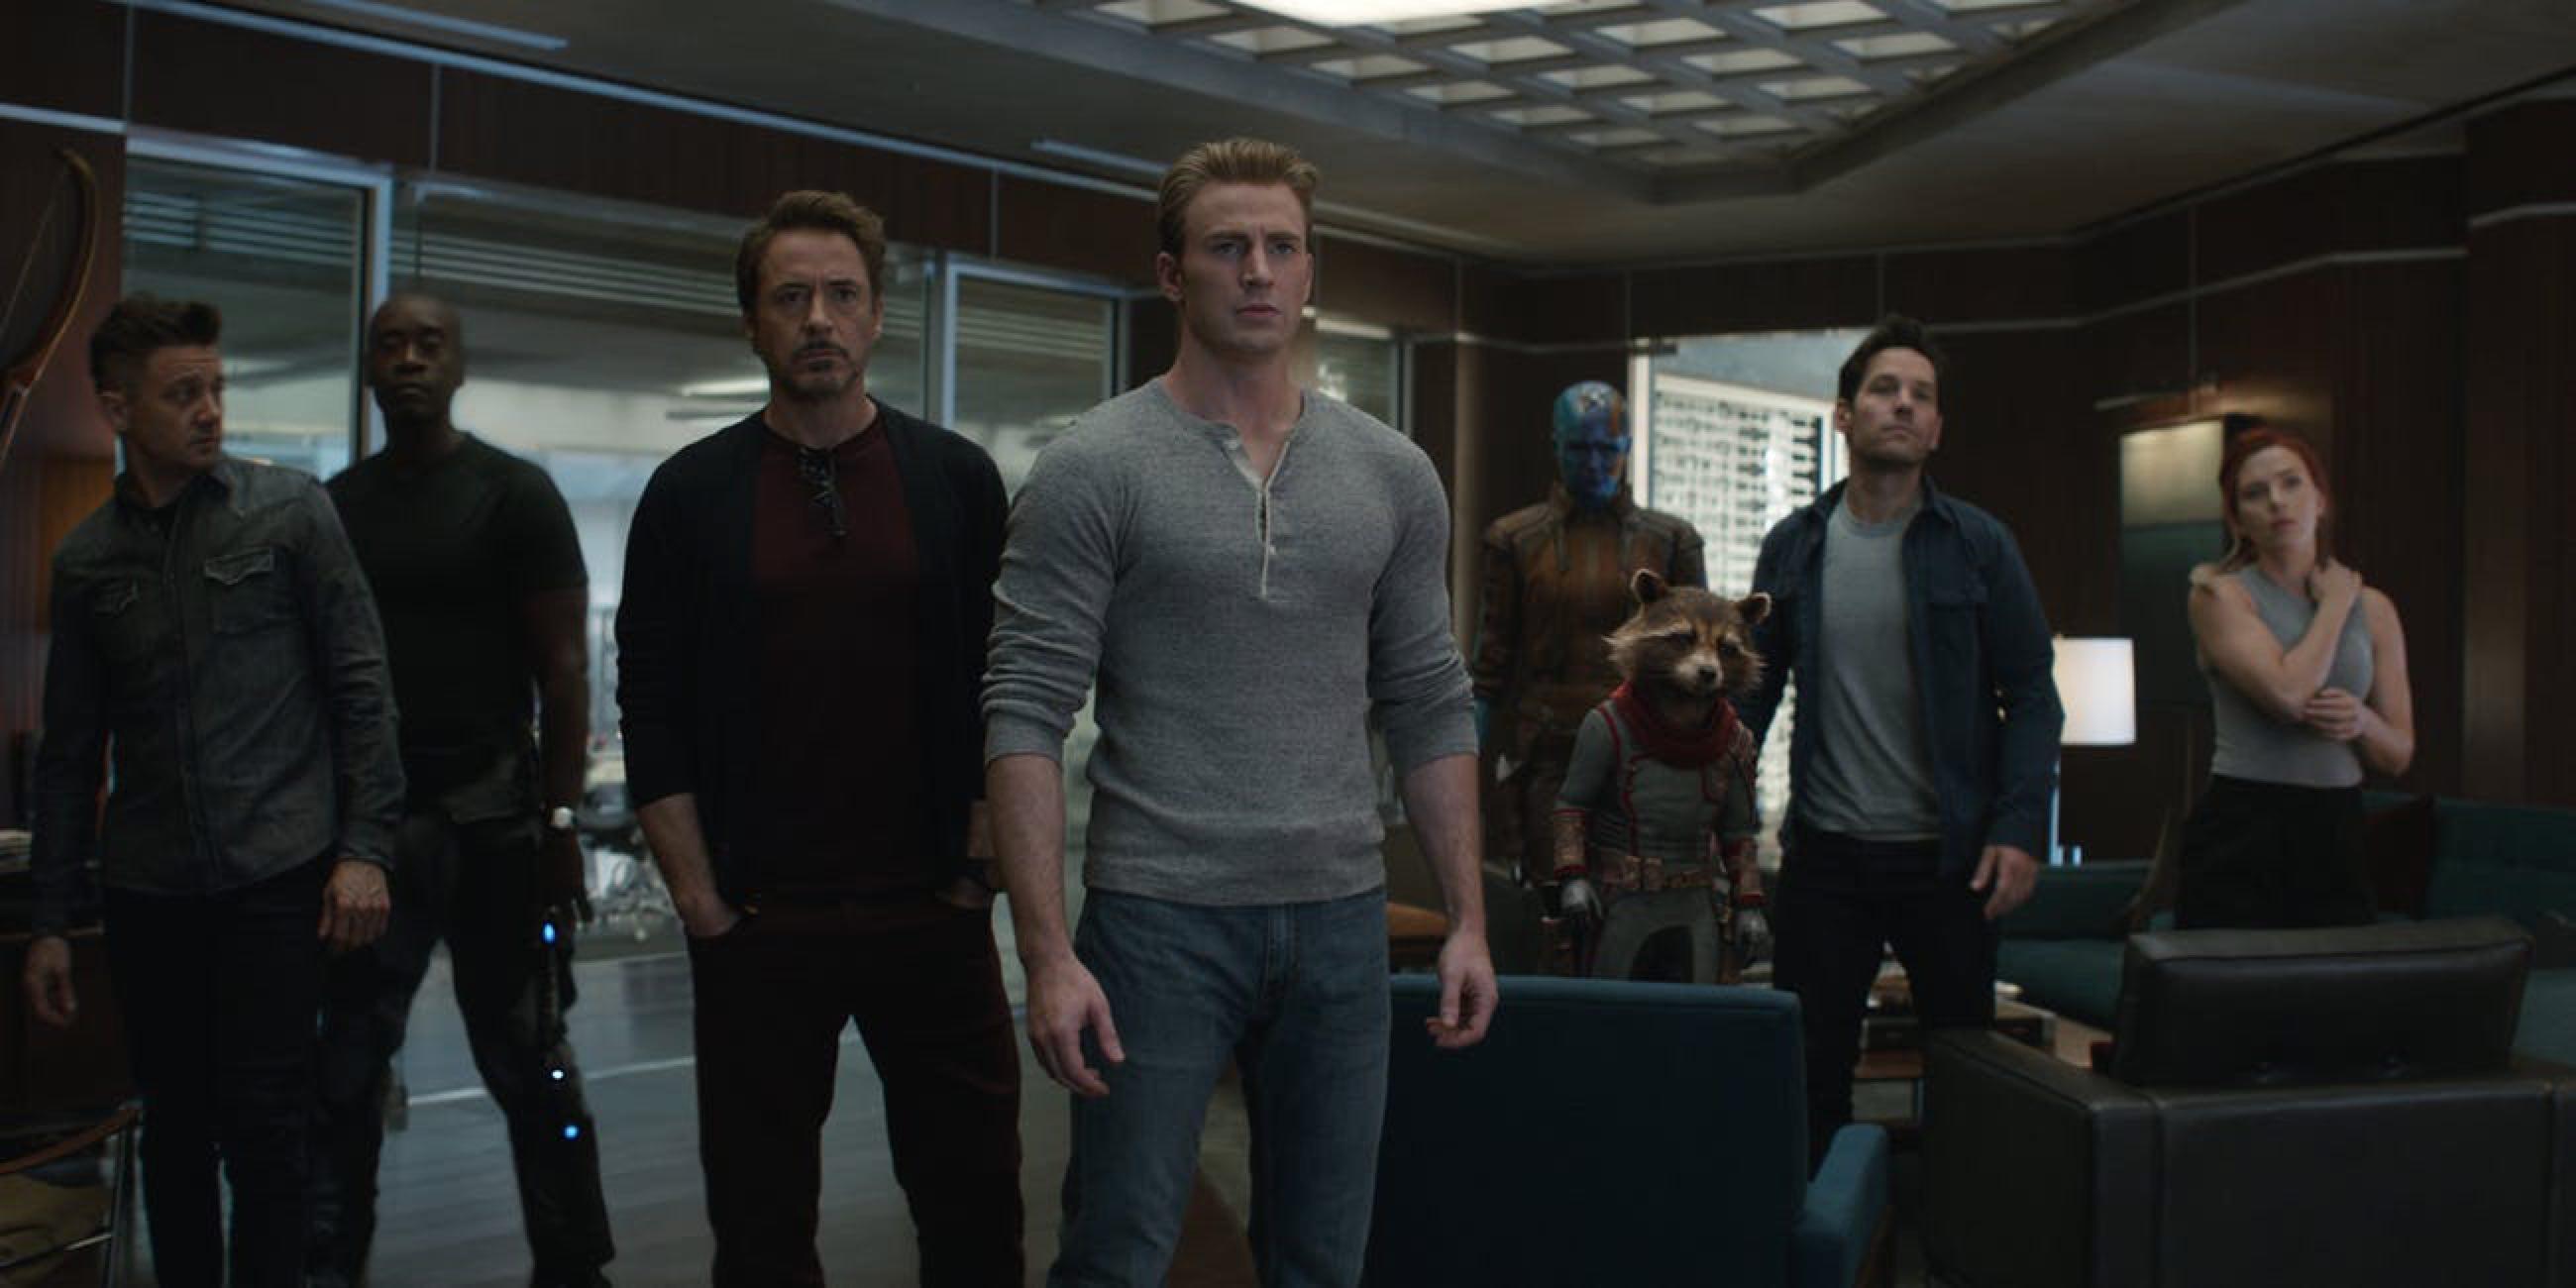 Let's Talk About Those Avengers Endgame Paradoxes